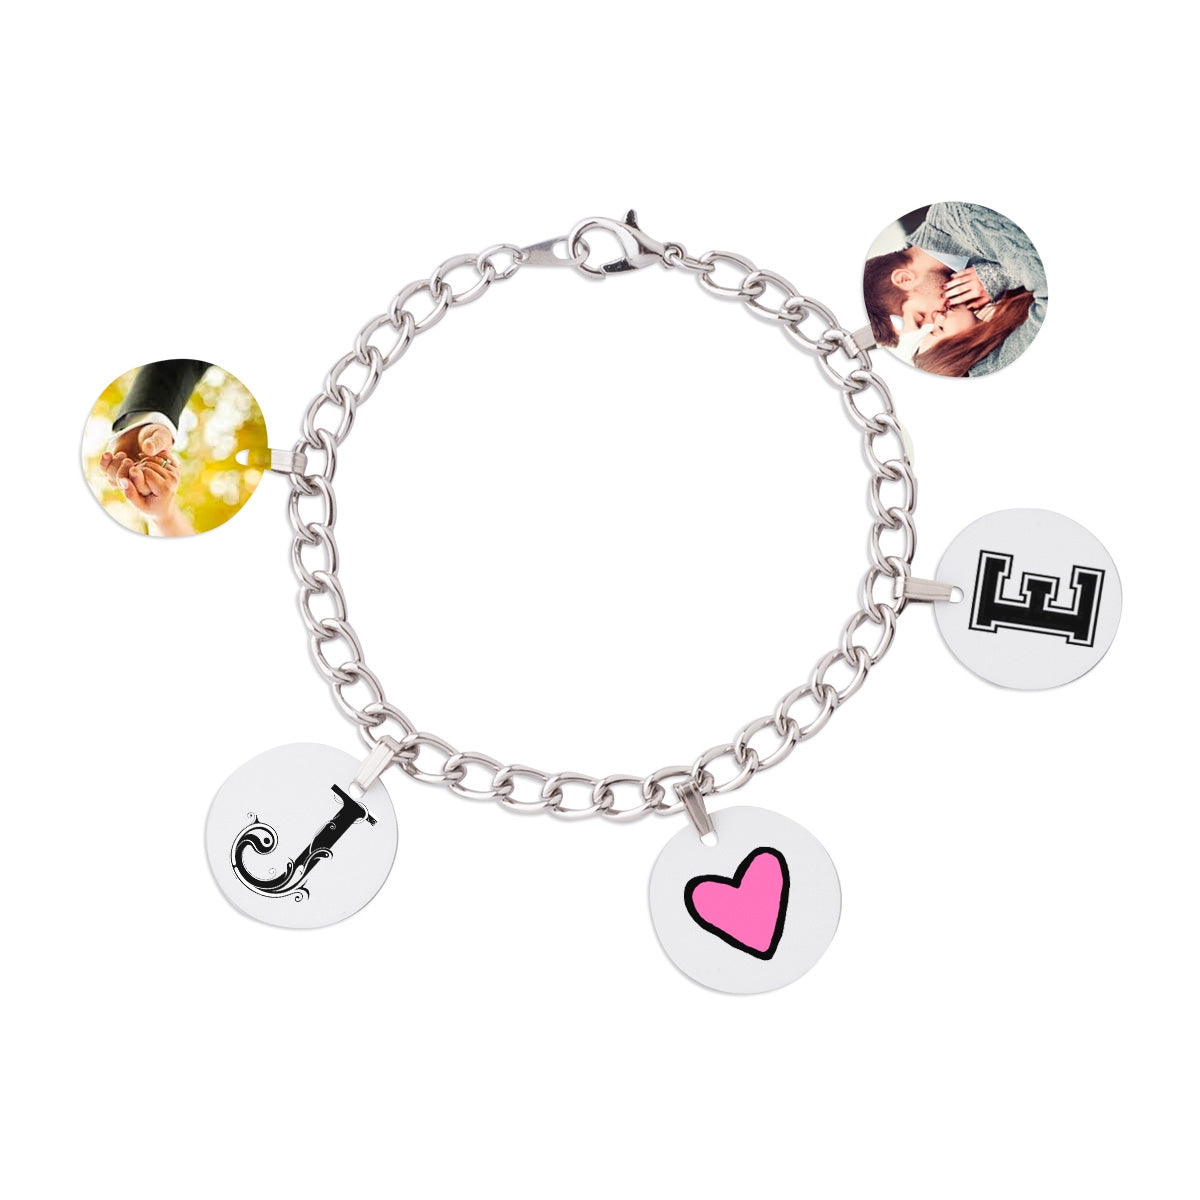 Childs Charm Bracelet, Personalised Gift